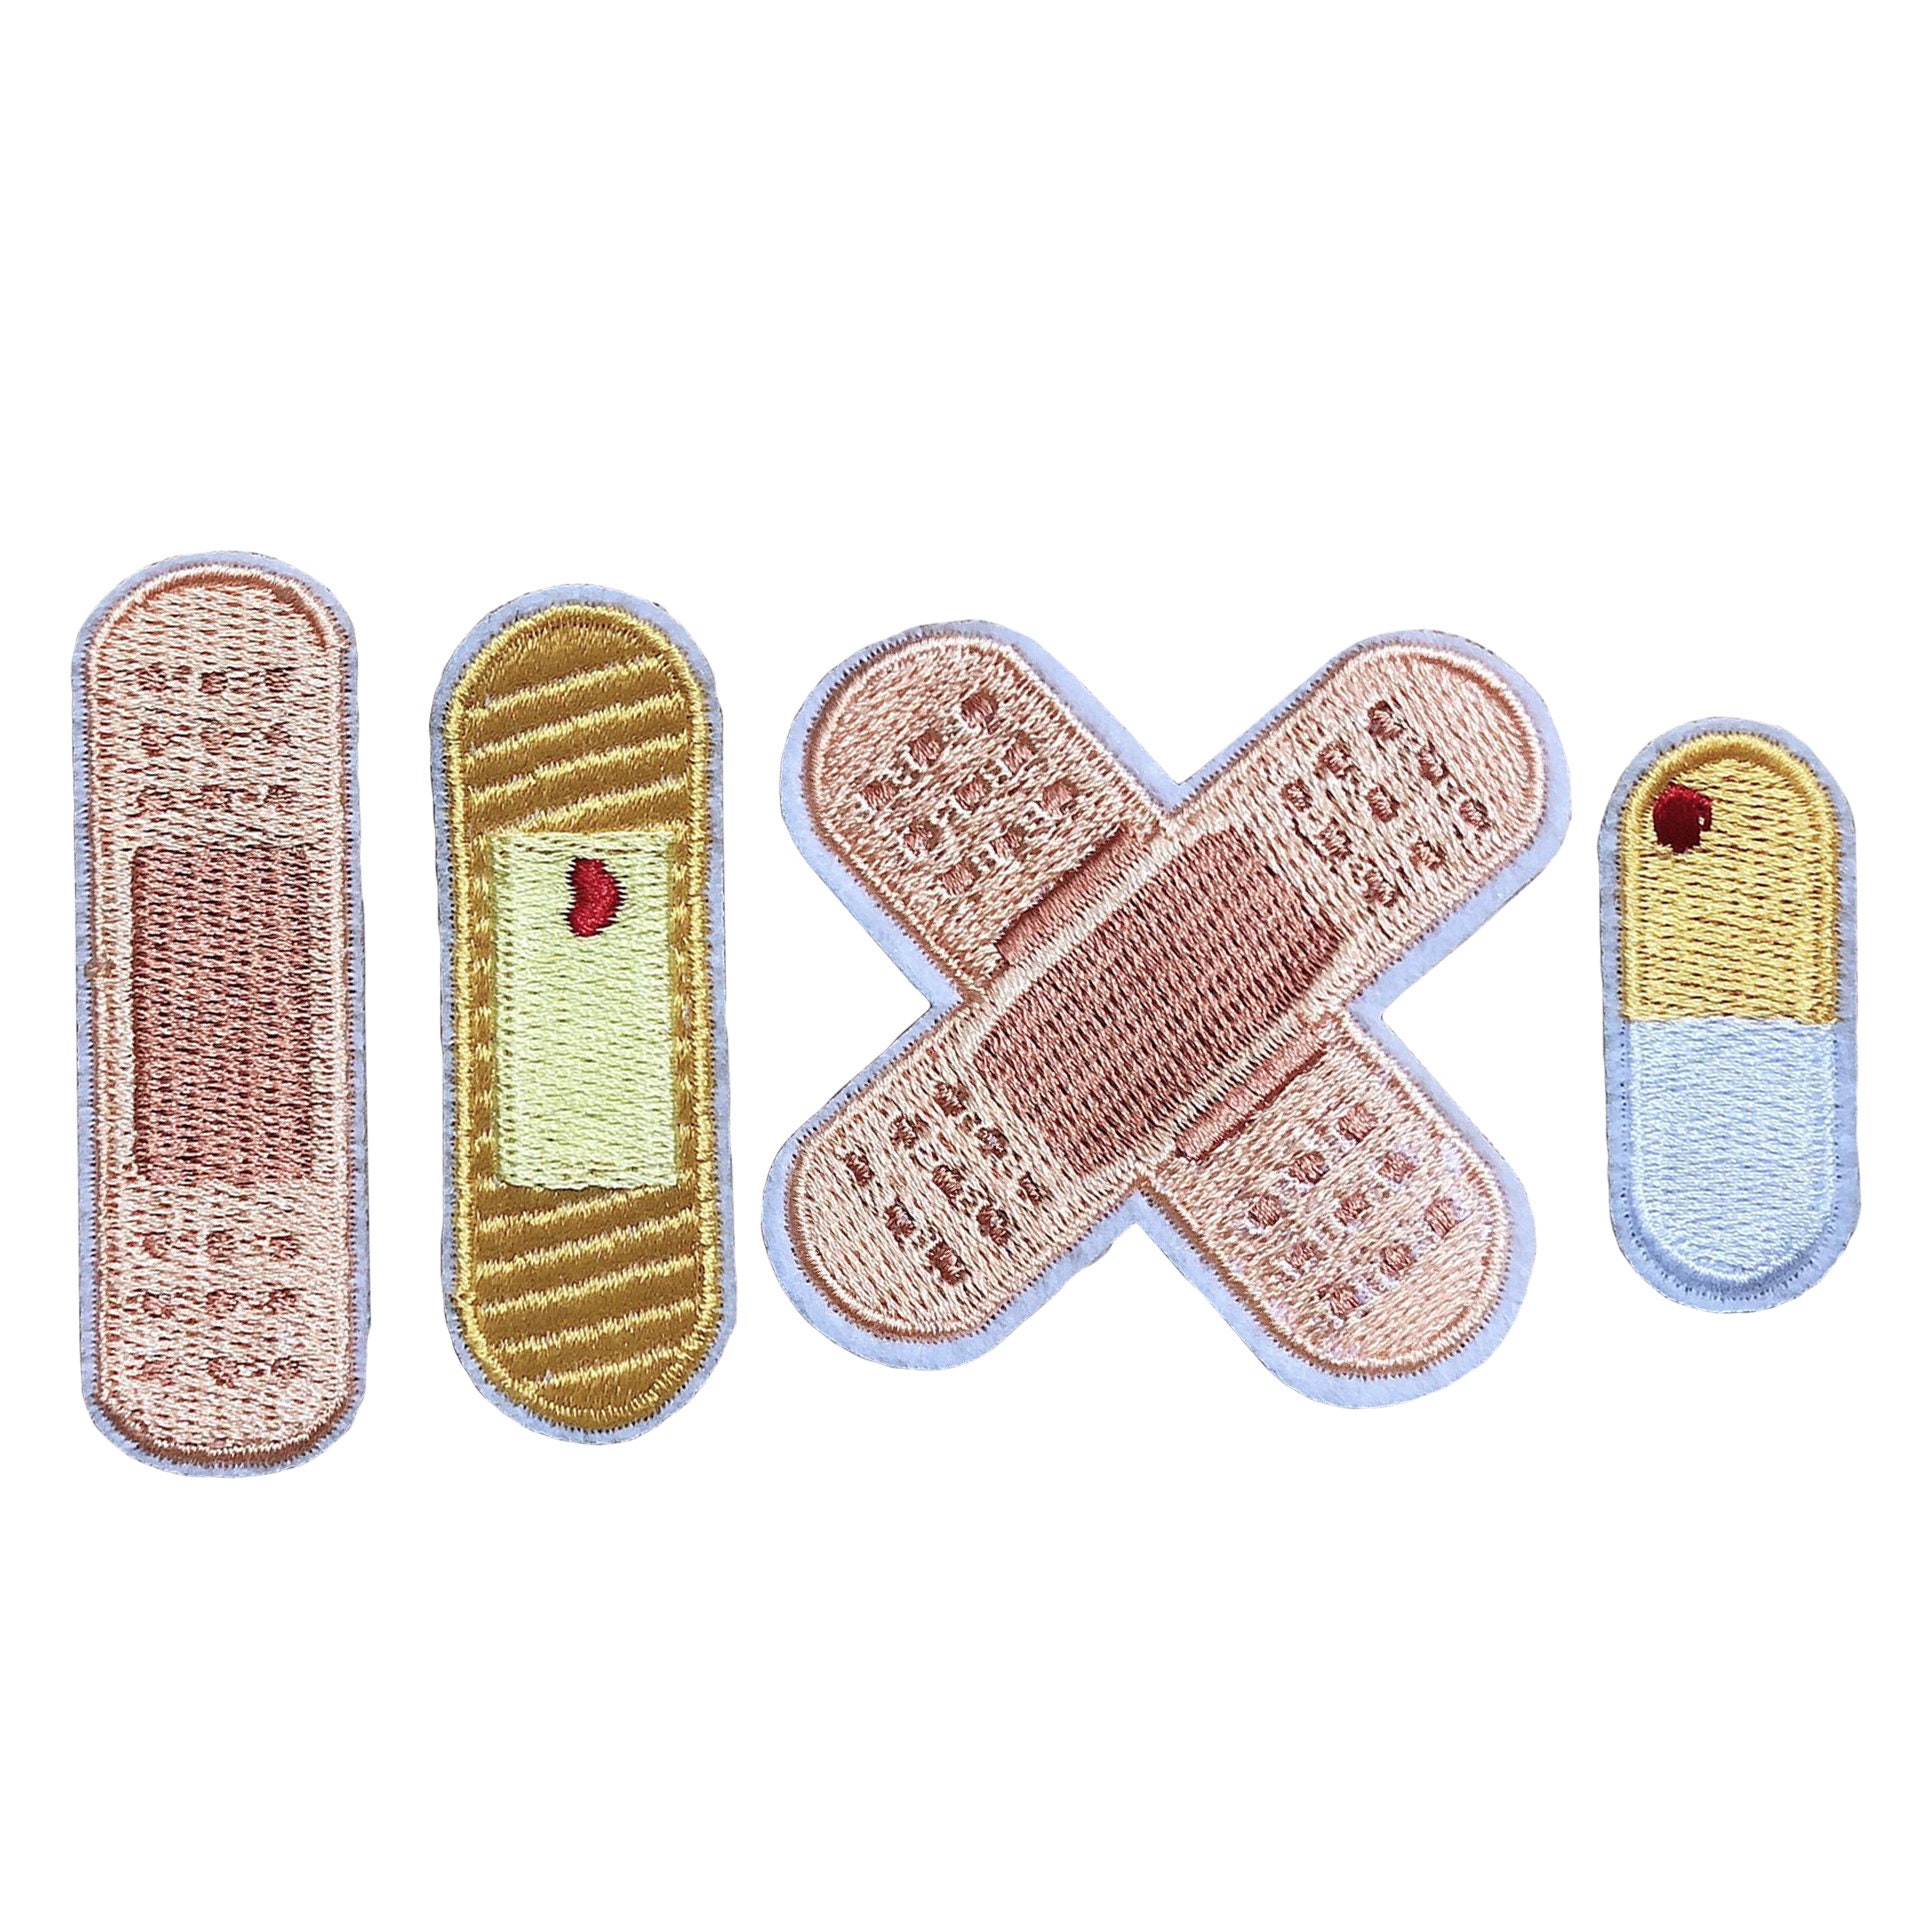 Band Aid Patches Iron On, 6Pcs Iron On Patches For Hats 